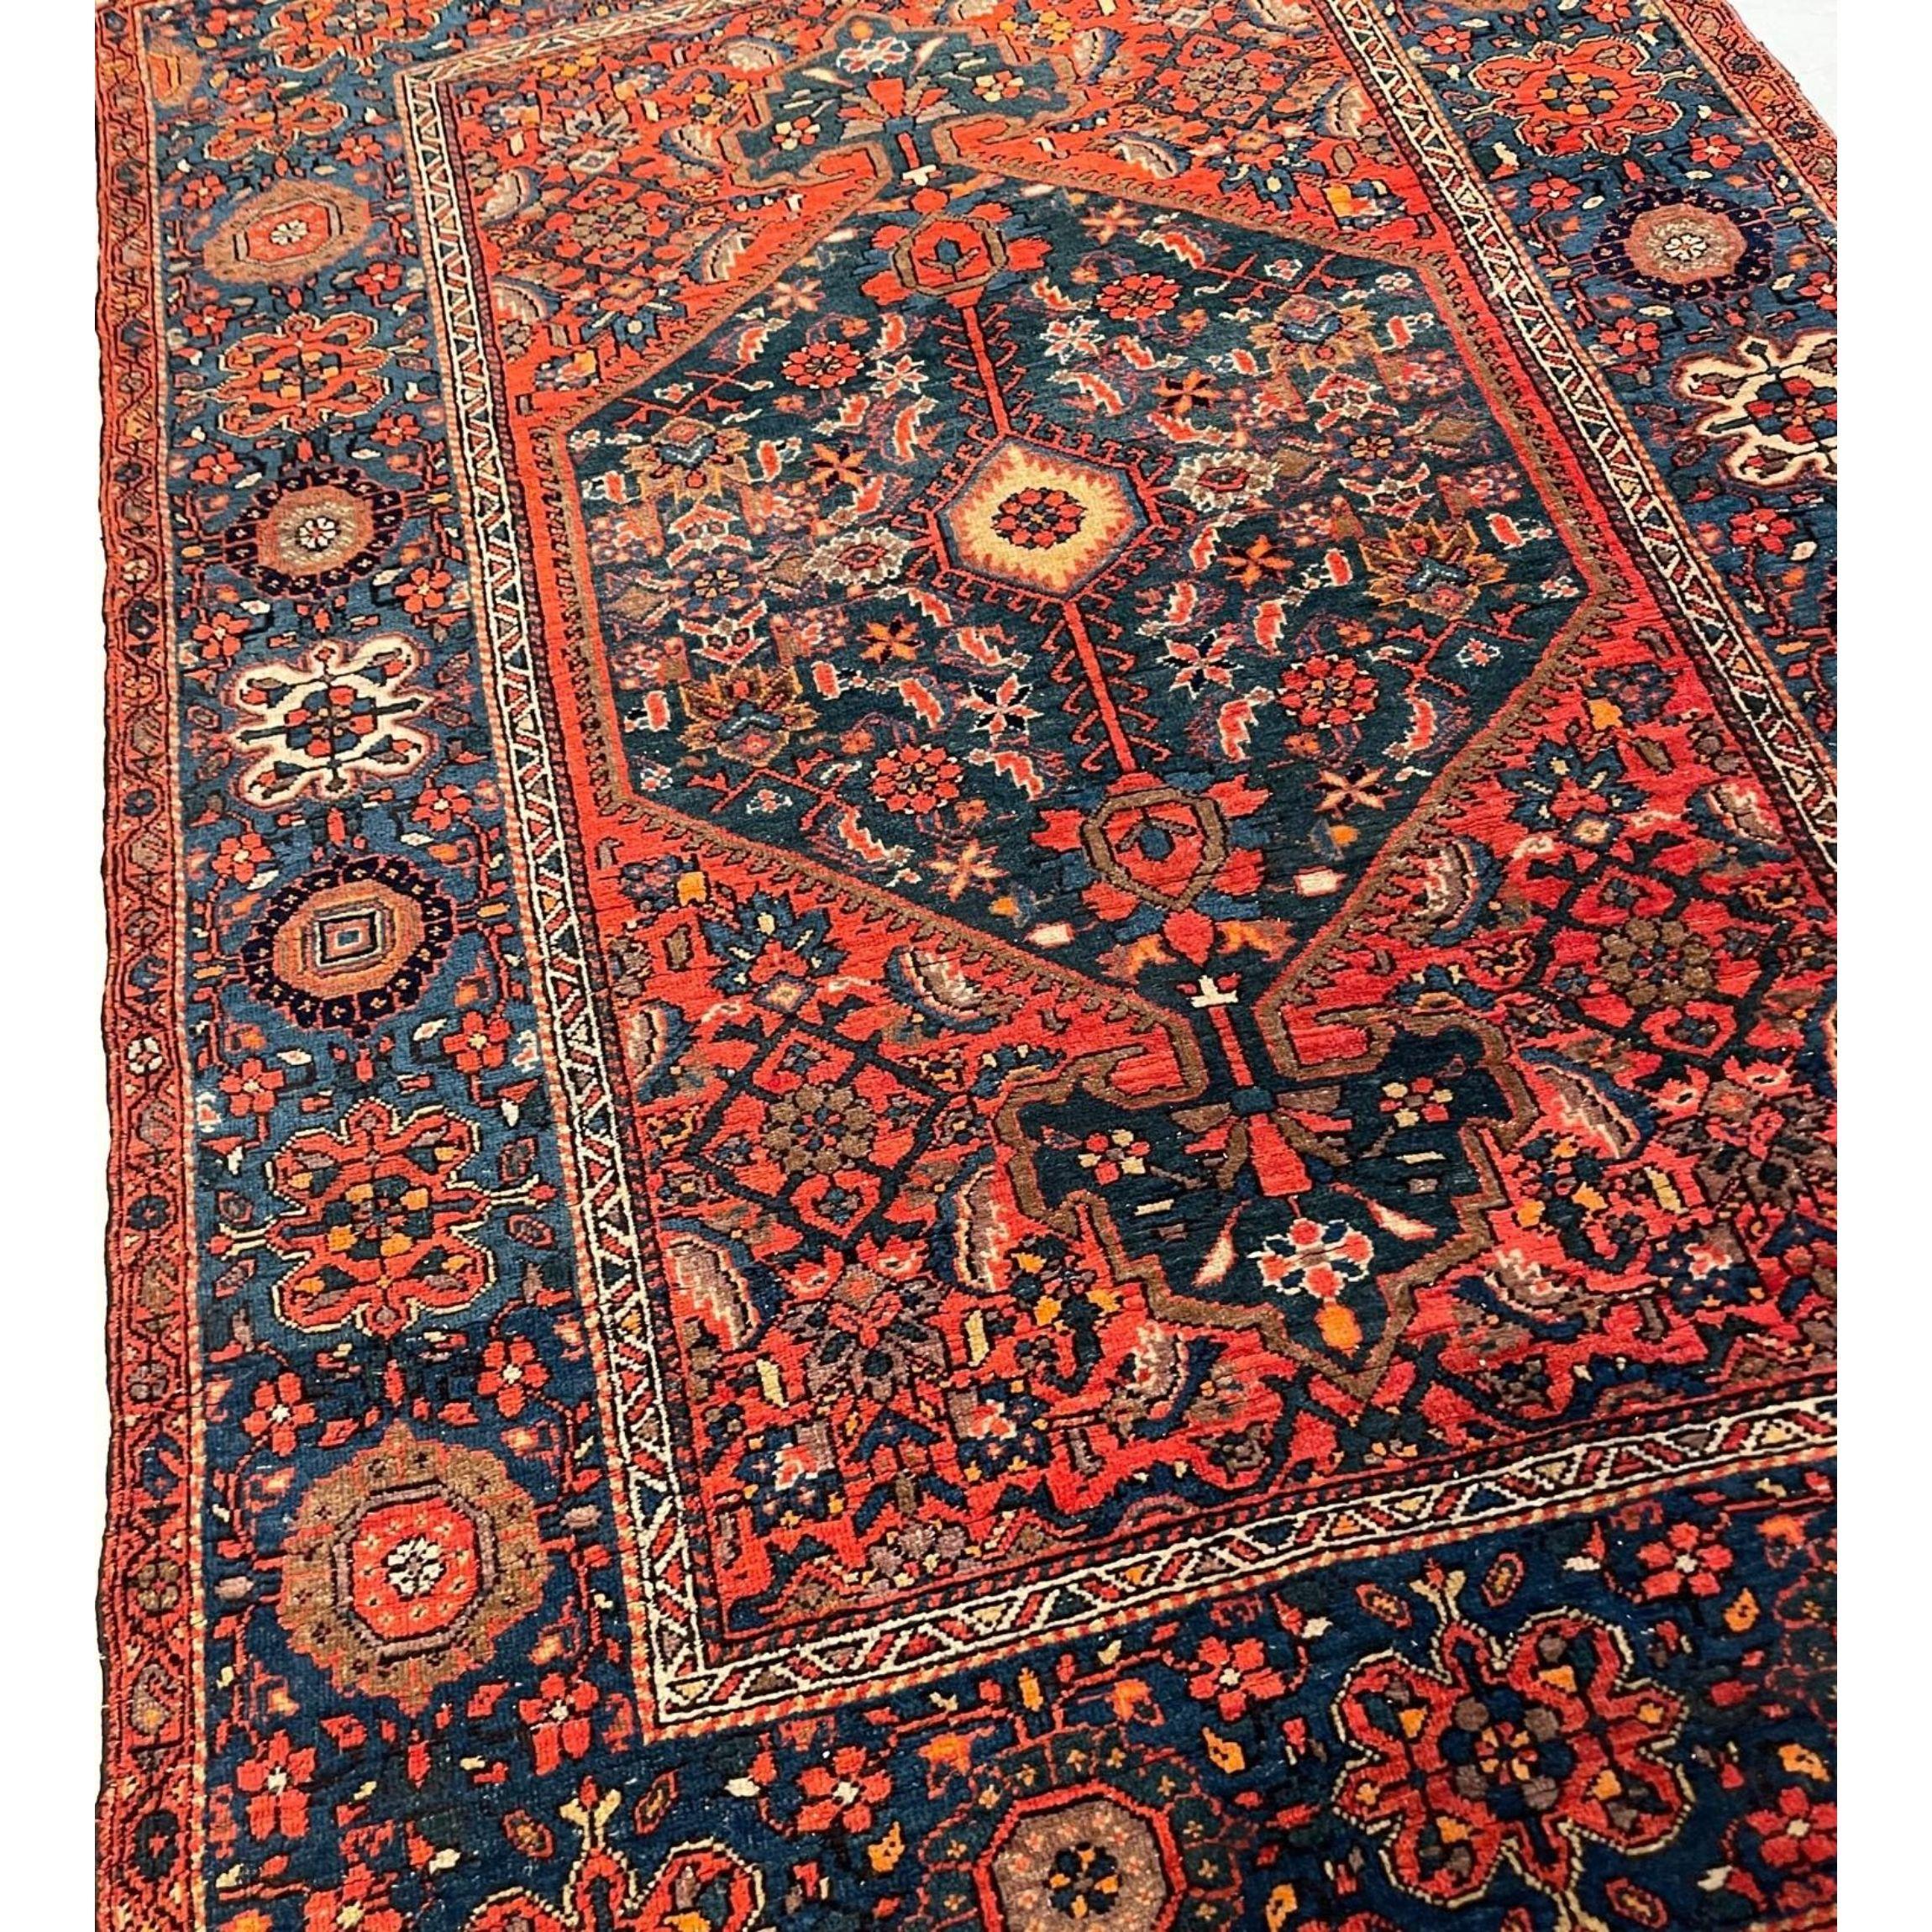 Sarouk Rugs– The thickness of the luxurious pile allows Sarouk rugs to withstand the level of foot traffic that would be typical in hallways, common rooms and foyers. The style, quality and durability of Sarouk rugs have made them extremely popular